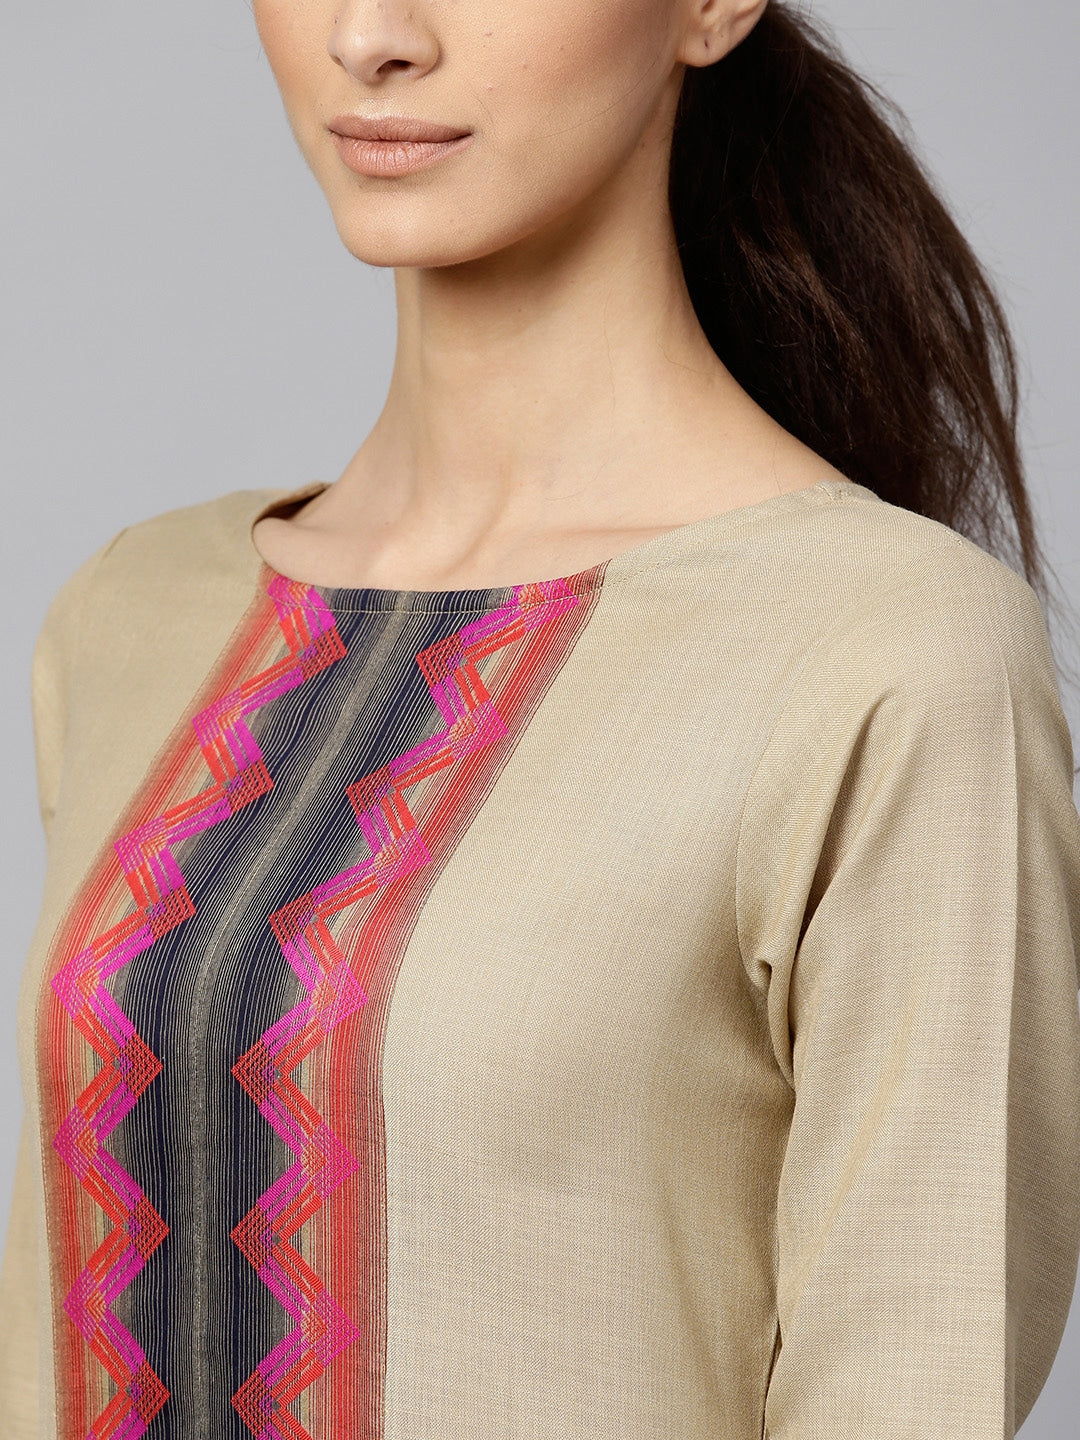 Muted Hazelnut Kurta Set - Indian Clothing in Denver, CO, Aurora, CO, Boulder, CO, Fort Collins, CO, Colorado Springs, CO, Parker, CO, Highlands Ranch, CO, Cherry Creek, CO, Centennial, CO, and Longmont, CO. Nationwide shipping USA - India Fashion X